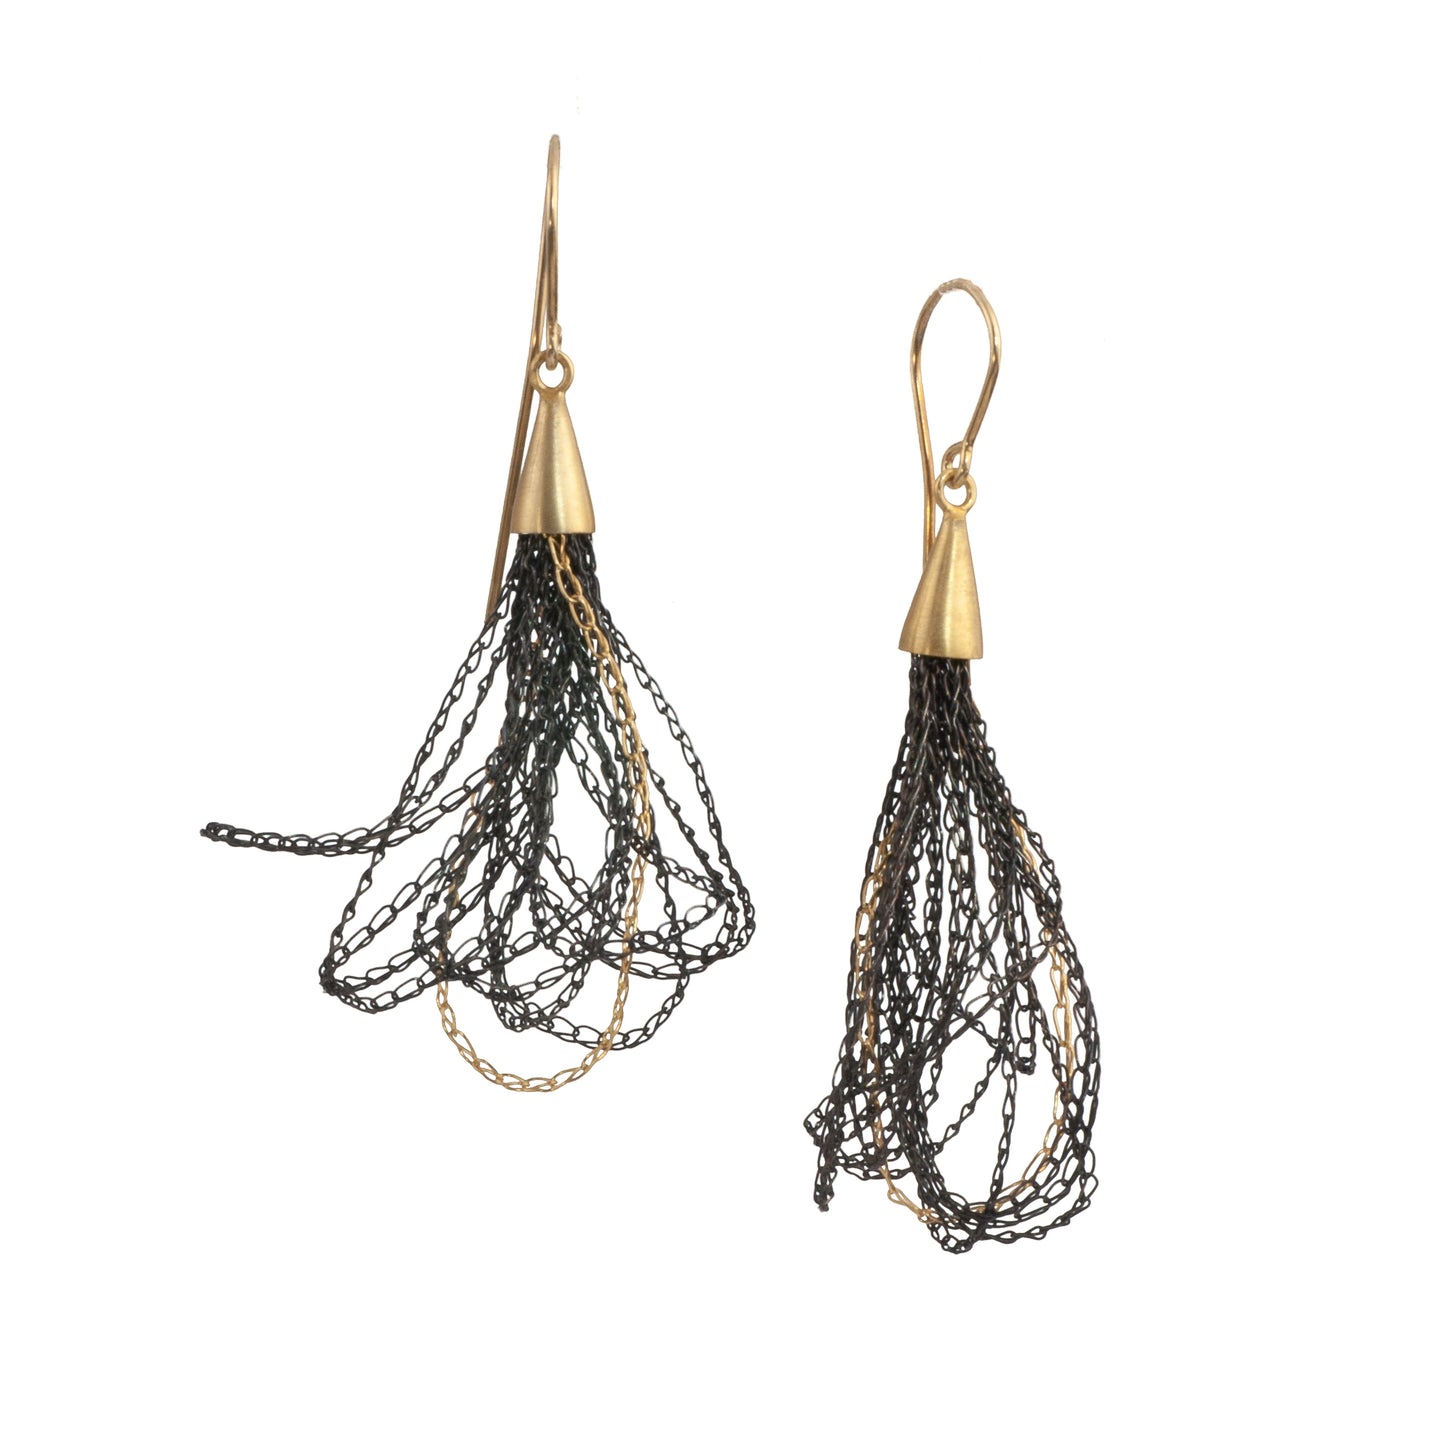 Mysterium Collection Black and Gold Multi-Strand Crochet Earrings